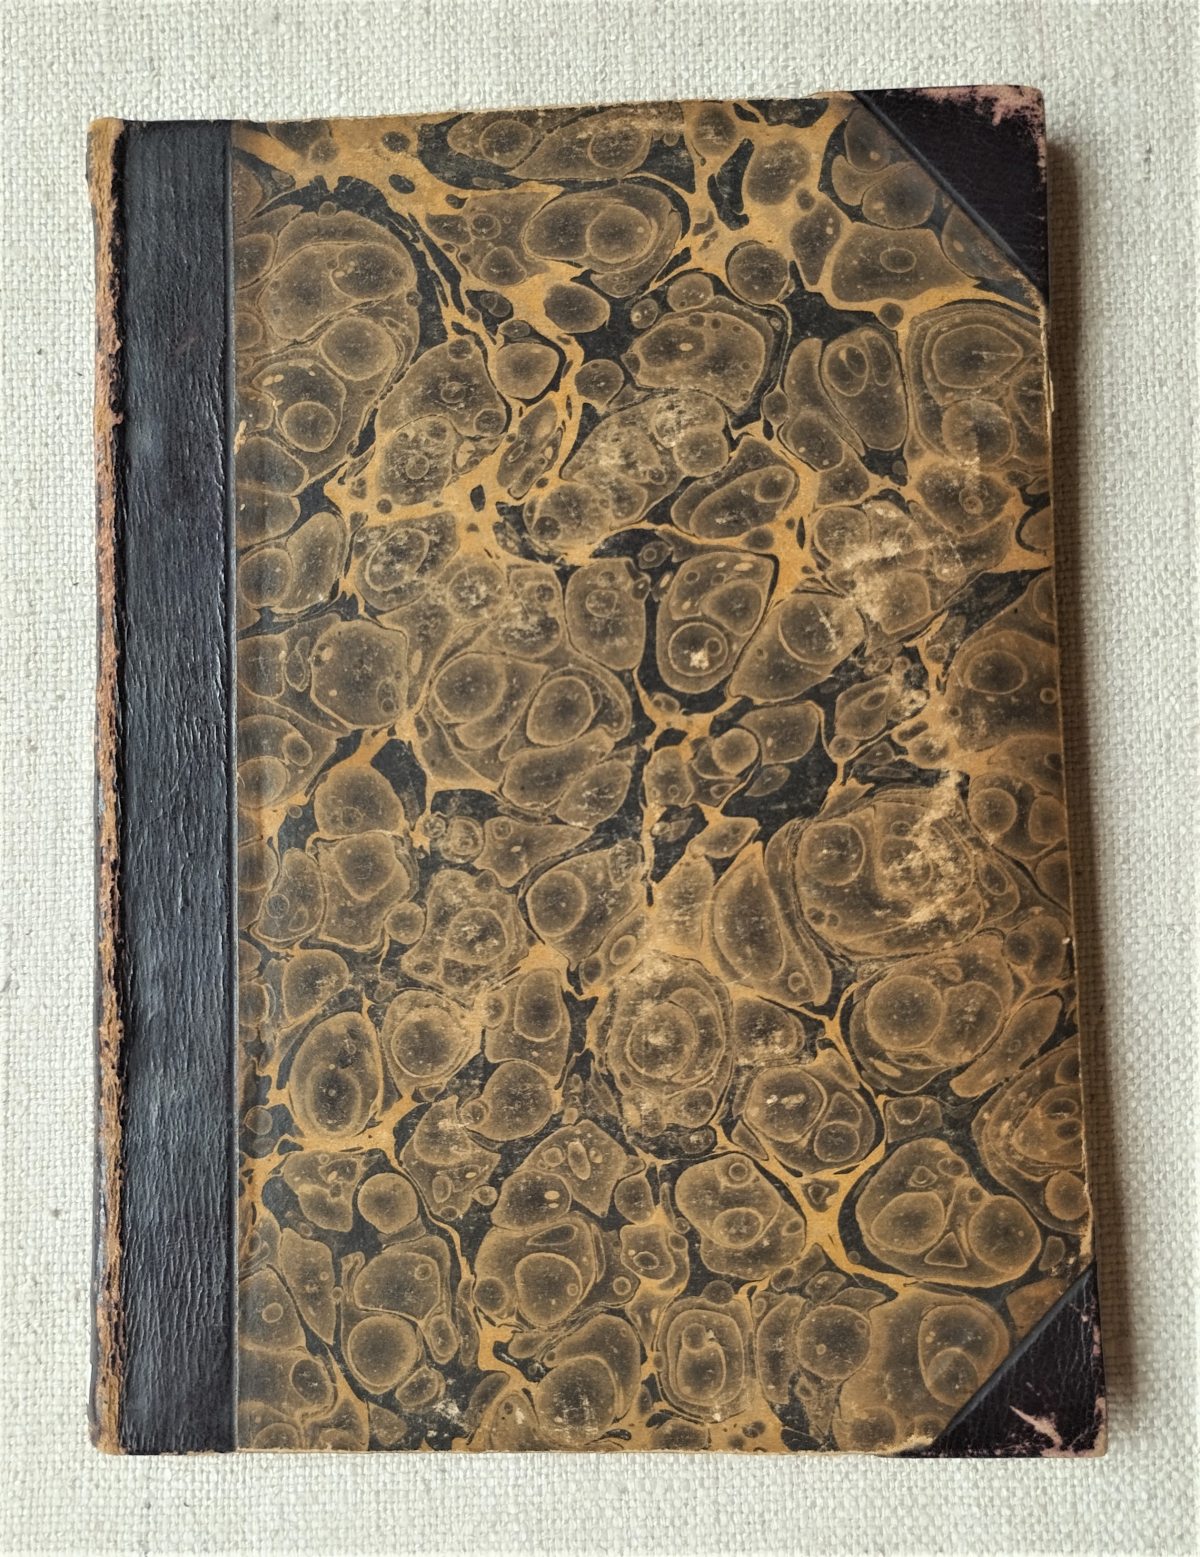 Binding of the book: quarter calf and tips, marbled boards. 